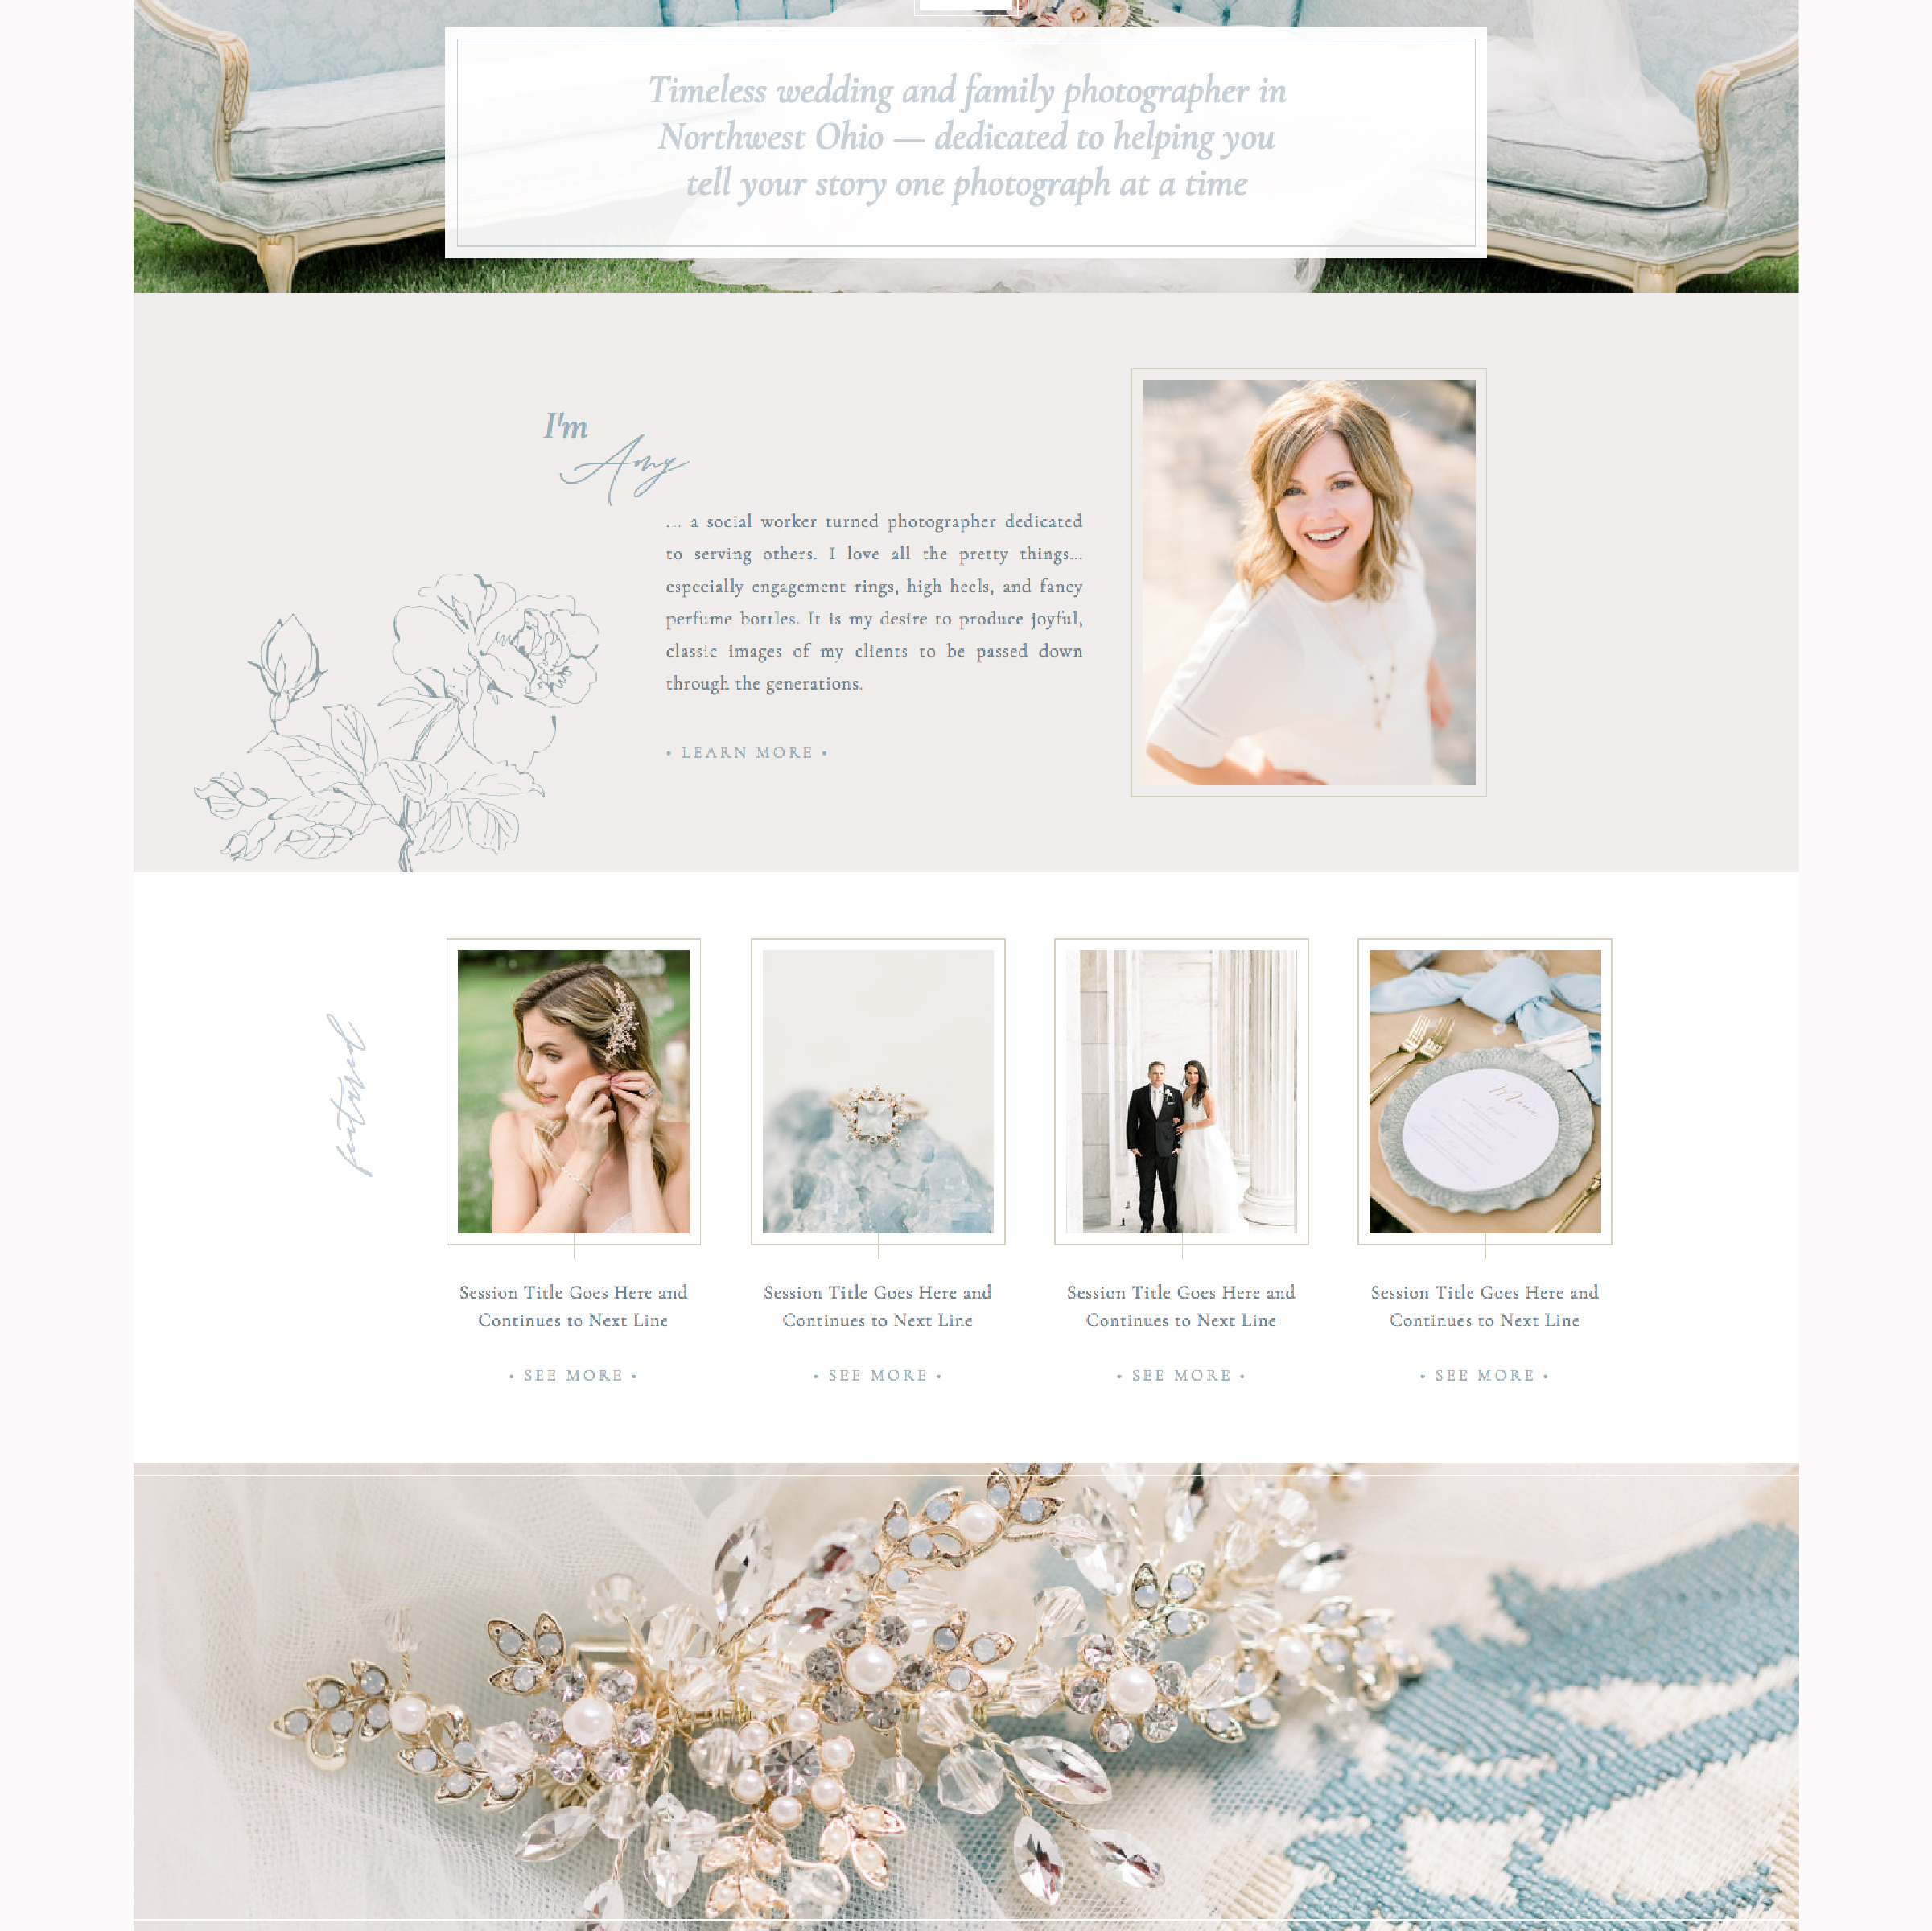 Sneak peek at Amy's home page - brand and website design